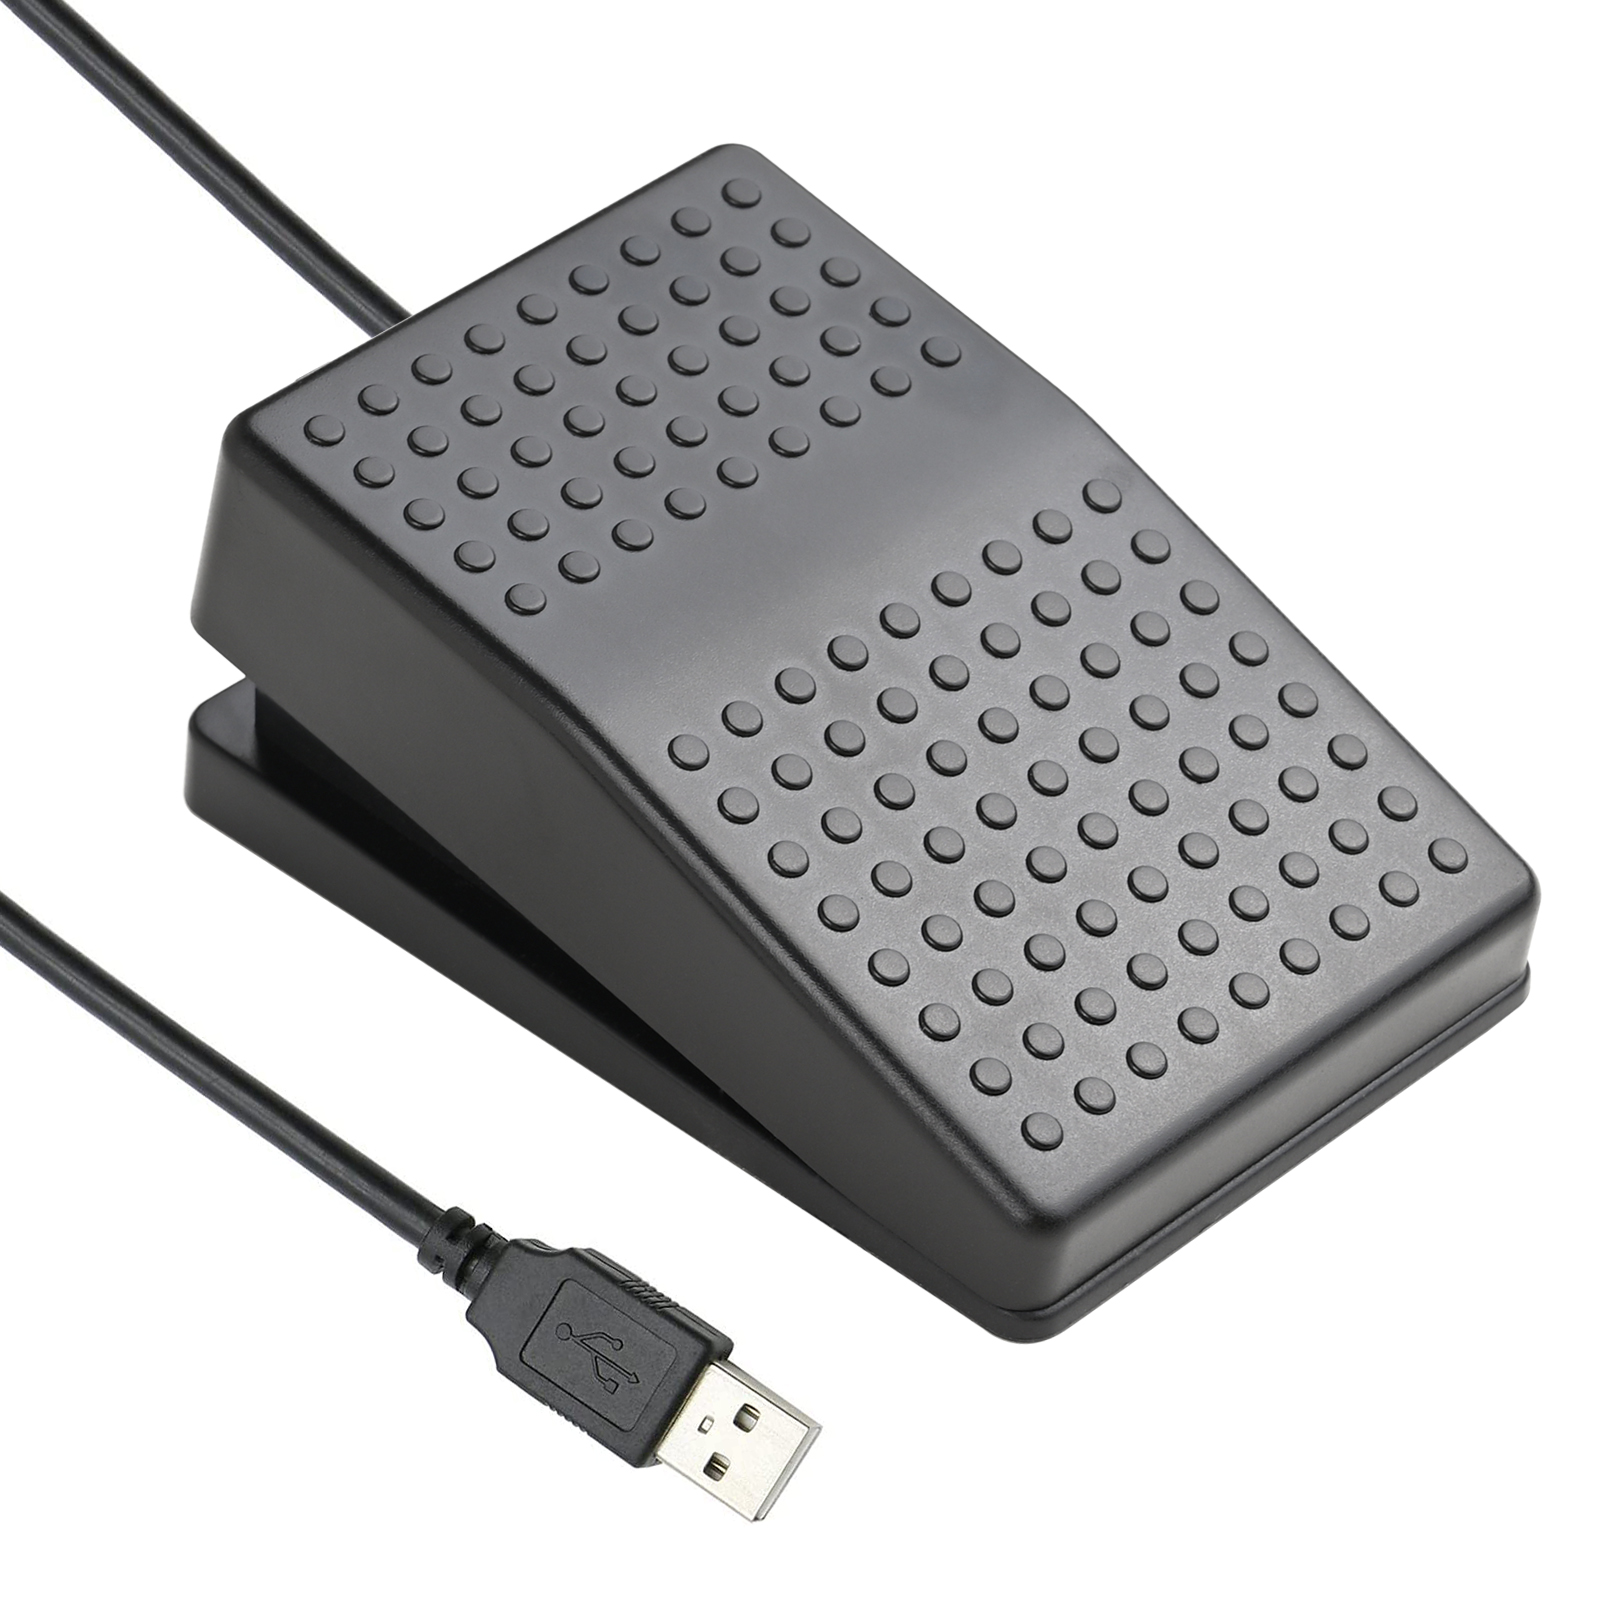 2022 Upgraded USB Foot Switch Single Pedal Optical Control [10737] - $18.99  